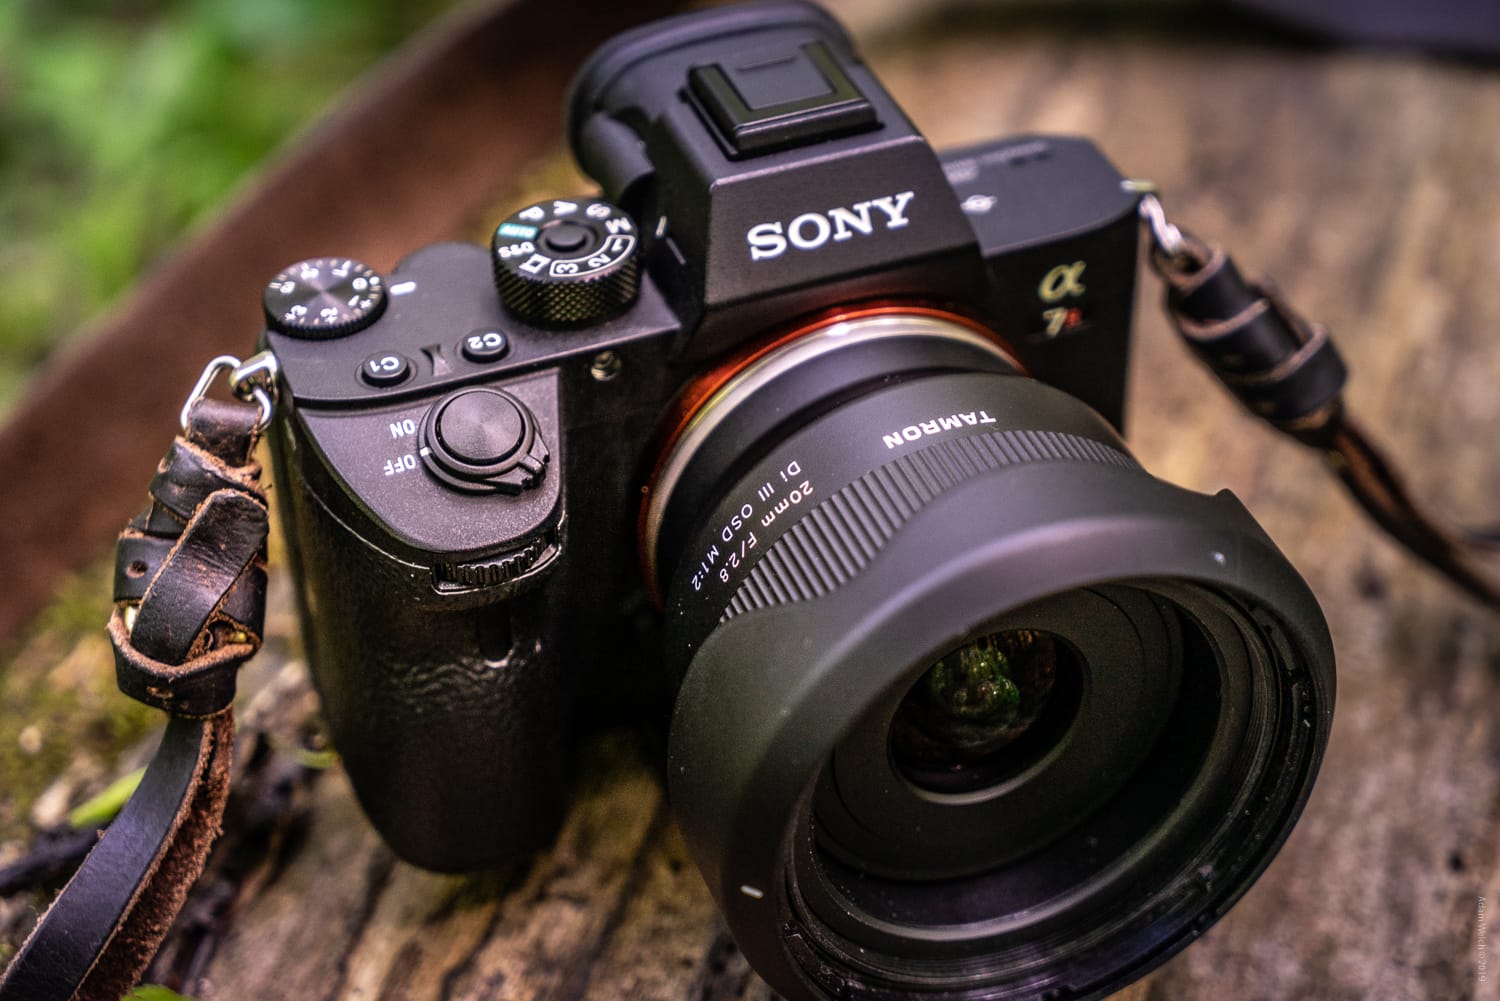 Hands-On Review of the Tamron 20mm f/2.8 Di III OSD M1:2 for Sony